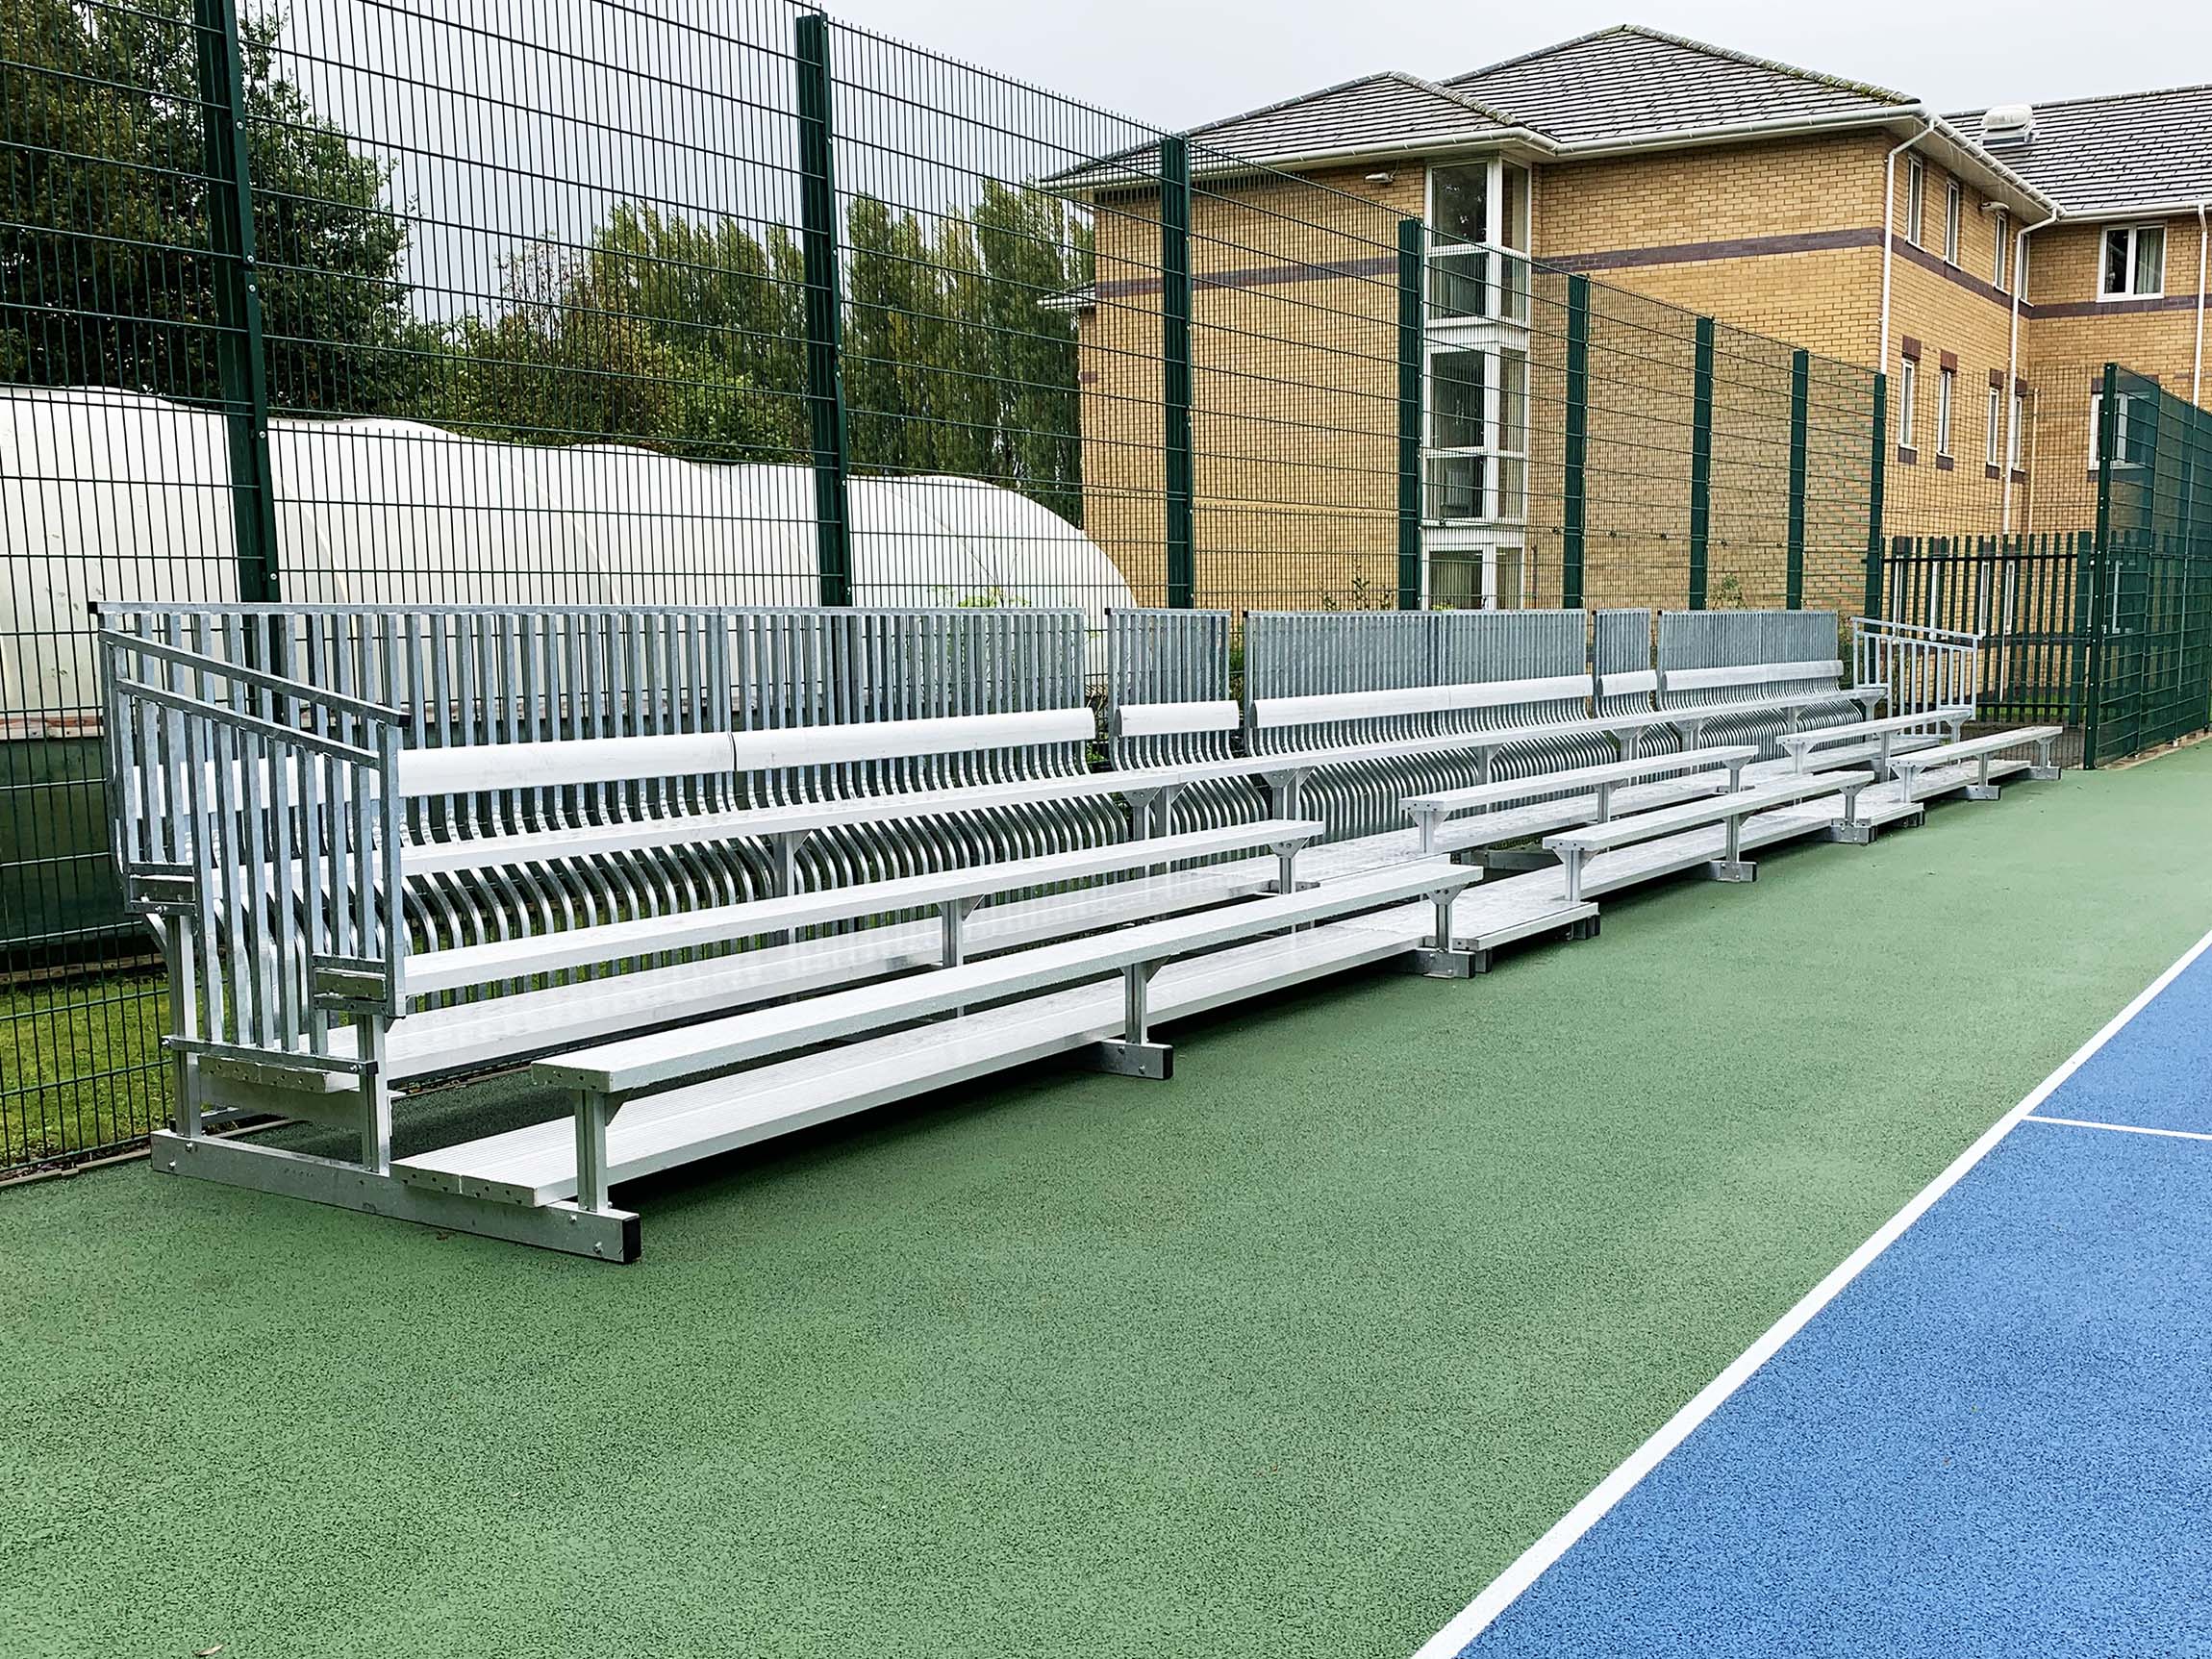 Achieving FA Green Guide Standards with Mainstage Bleacher Seating Systems